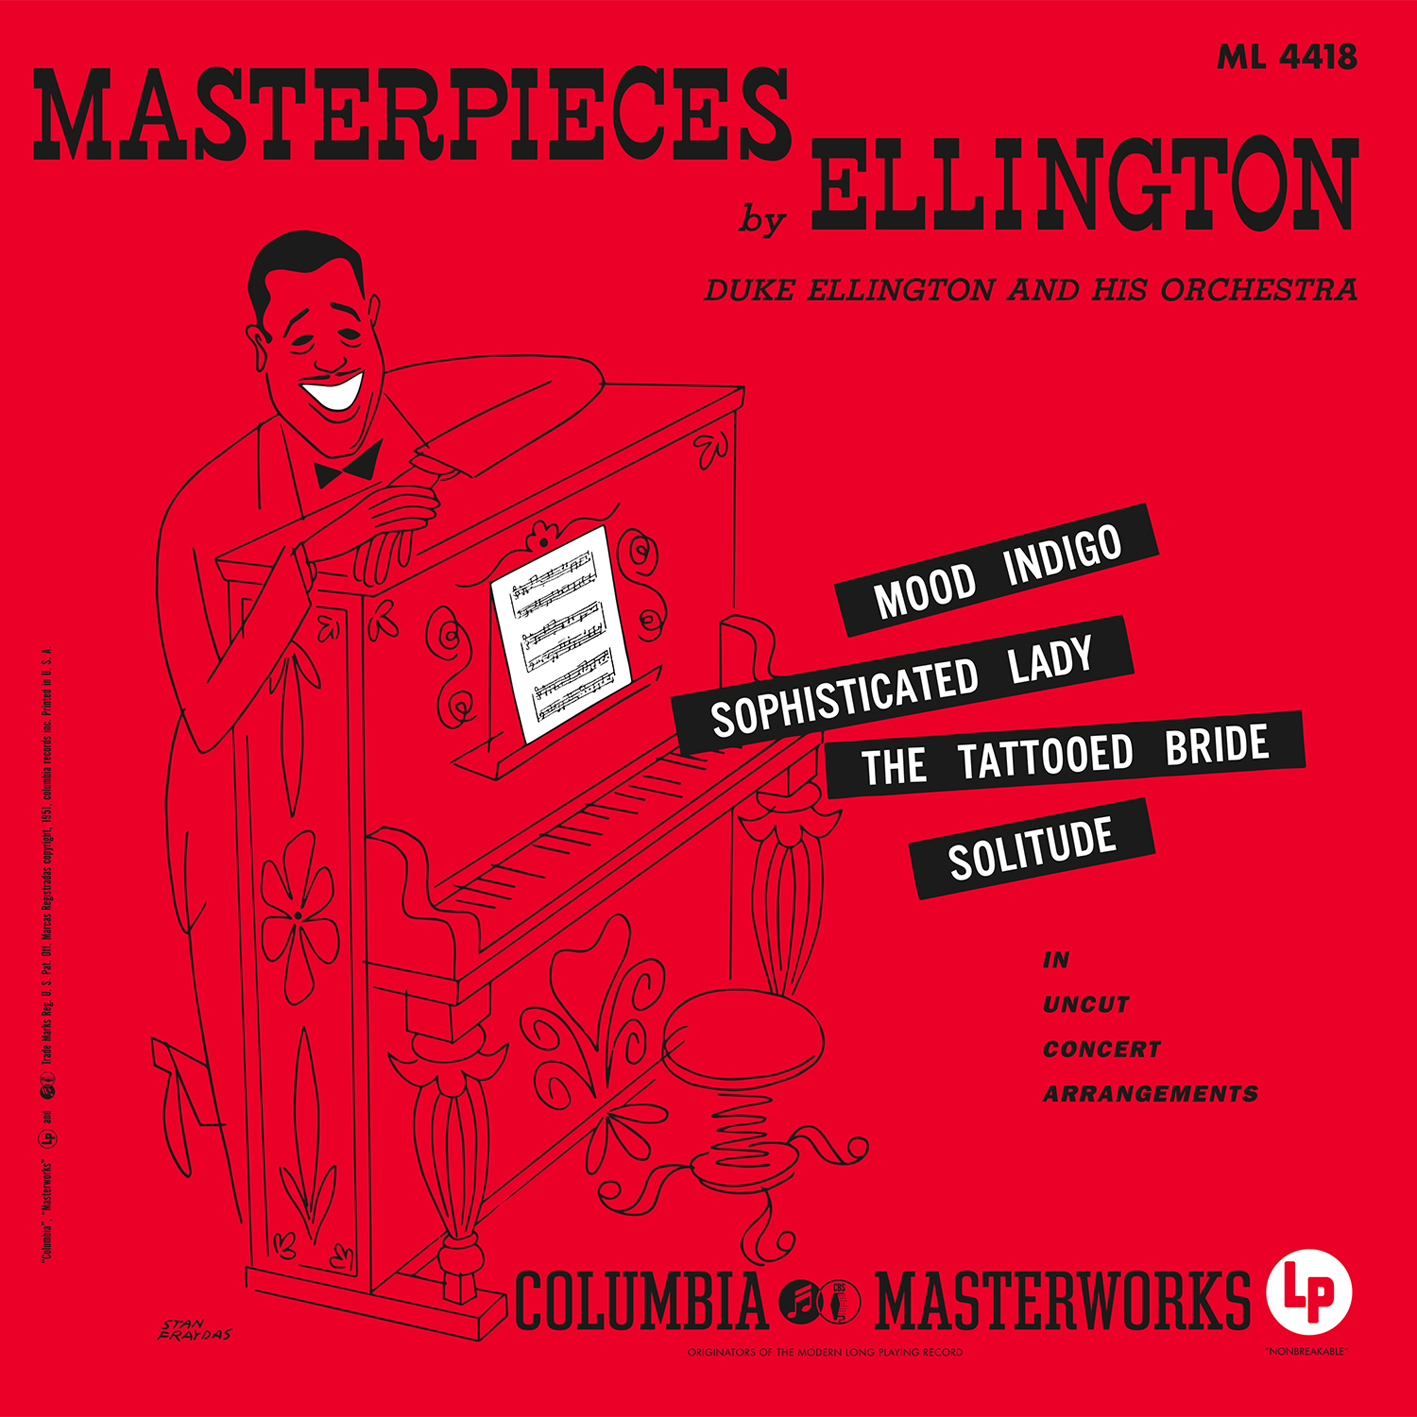 Duke Ellington & His Orchestra – Masterpieces by Ellington (1951) [Analogue Productions 2014] SACD ISO + DSF DSD64 + Hi-Res FLAC